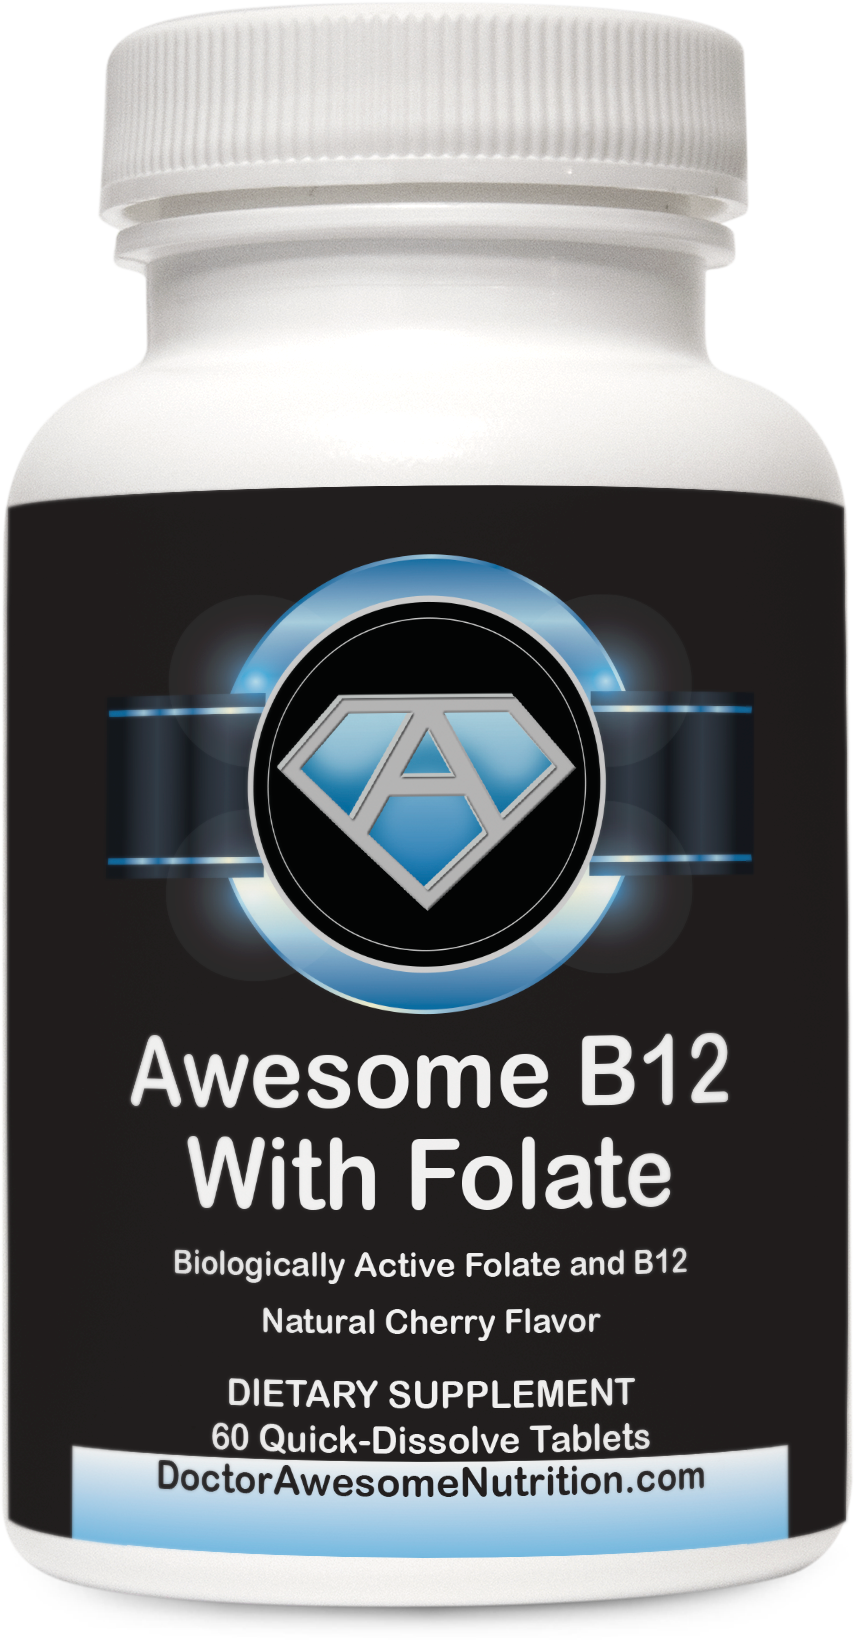 Awesome B12 With Folate